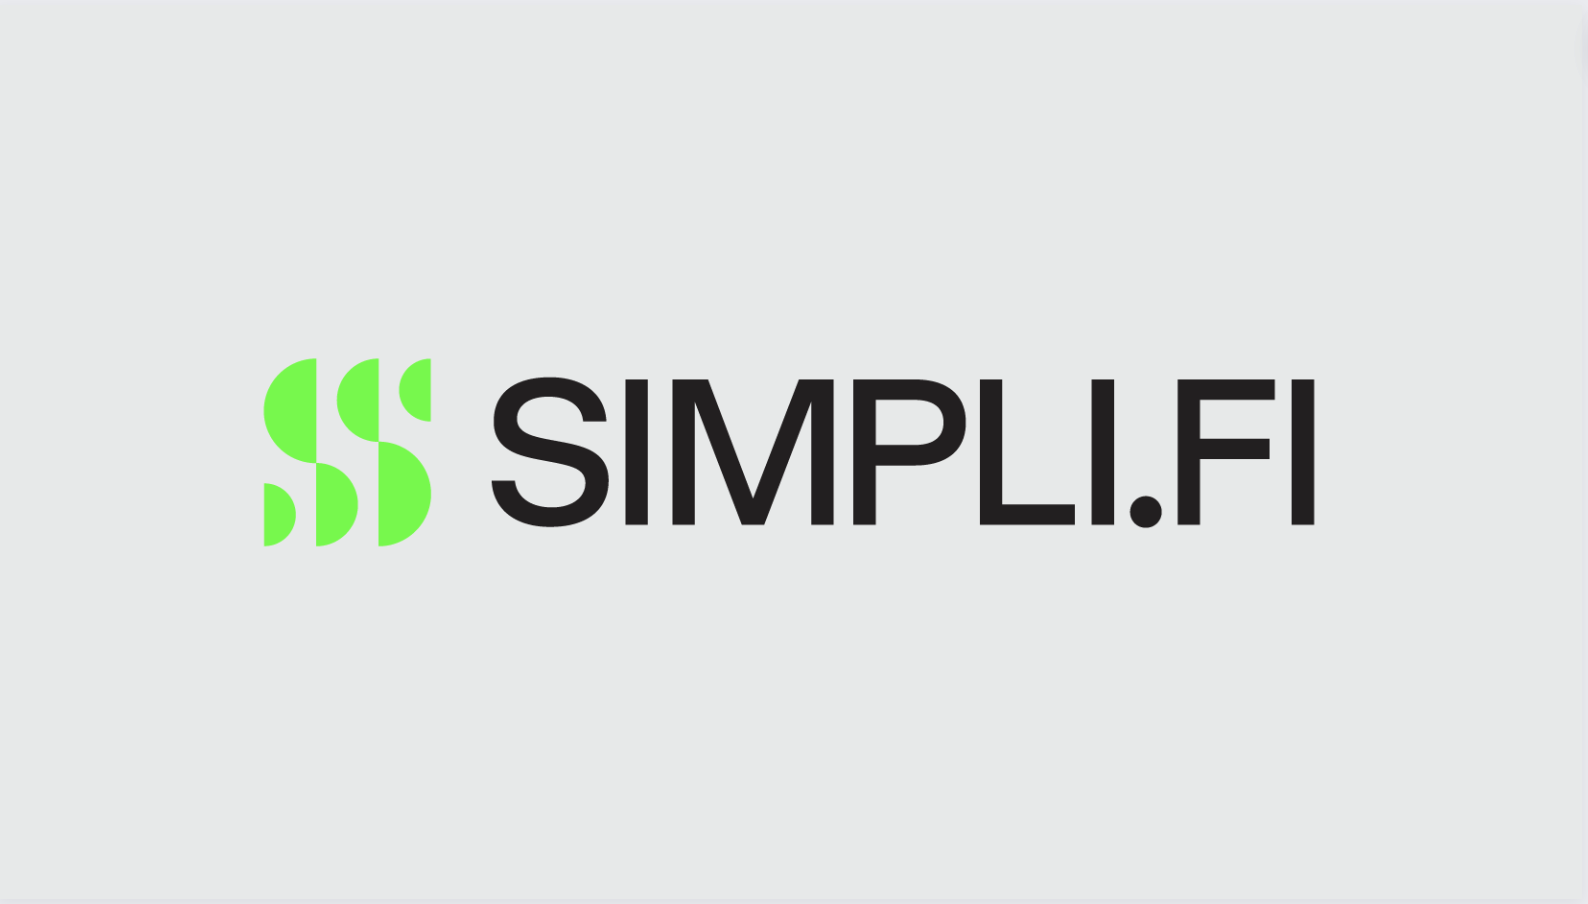 Simpli.fi's logo, black text and a green graphic on a light gray background